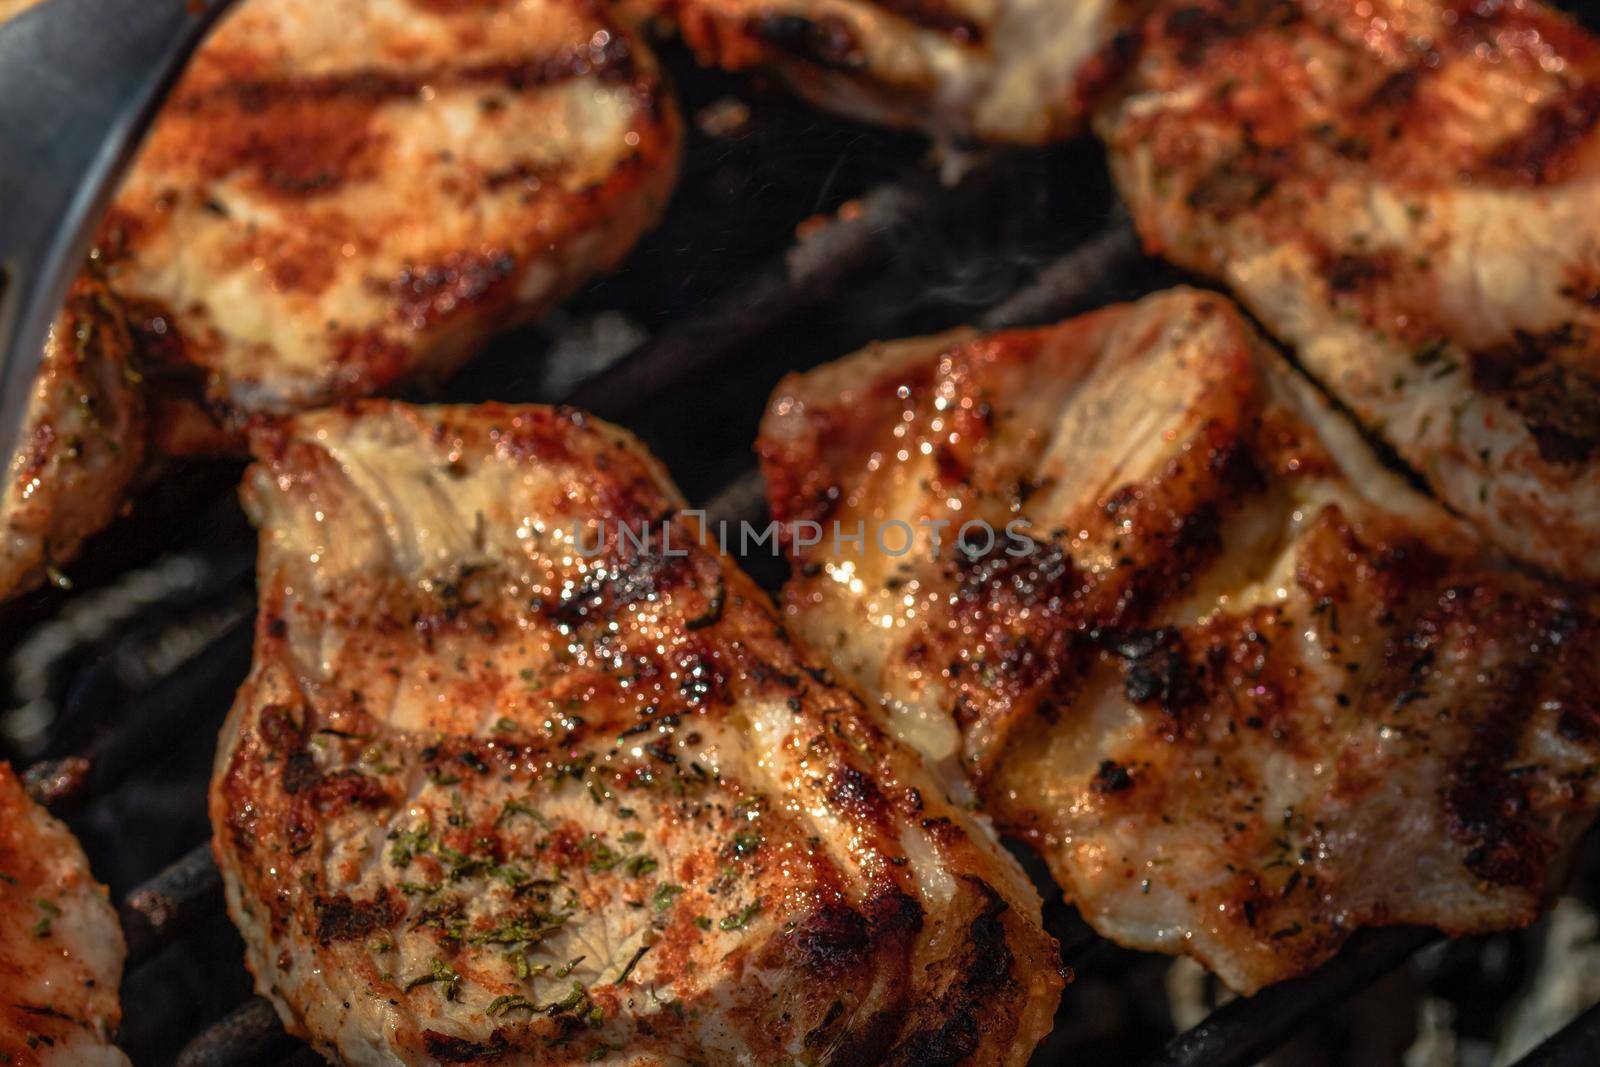 Grilling pork steaks. Delicious meat steaks close up cooking on the barbecue grill